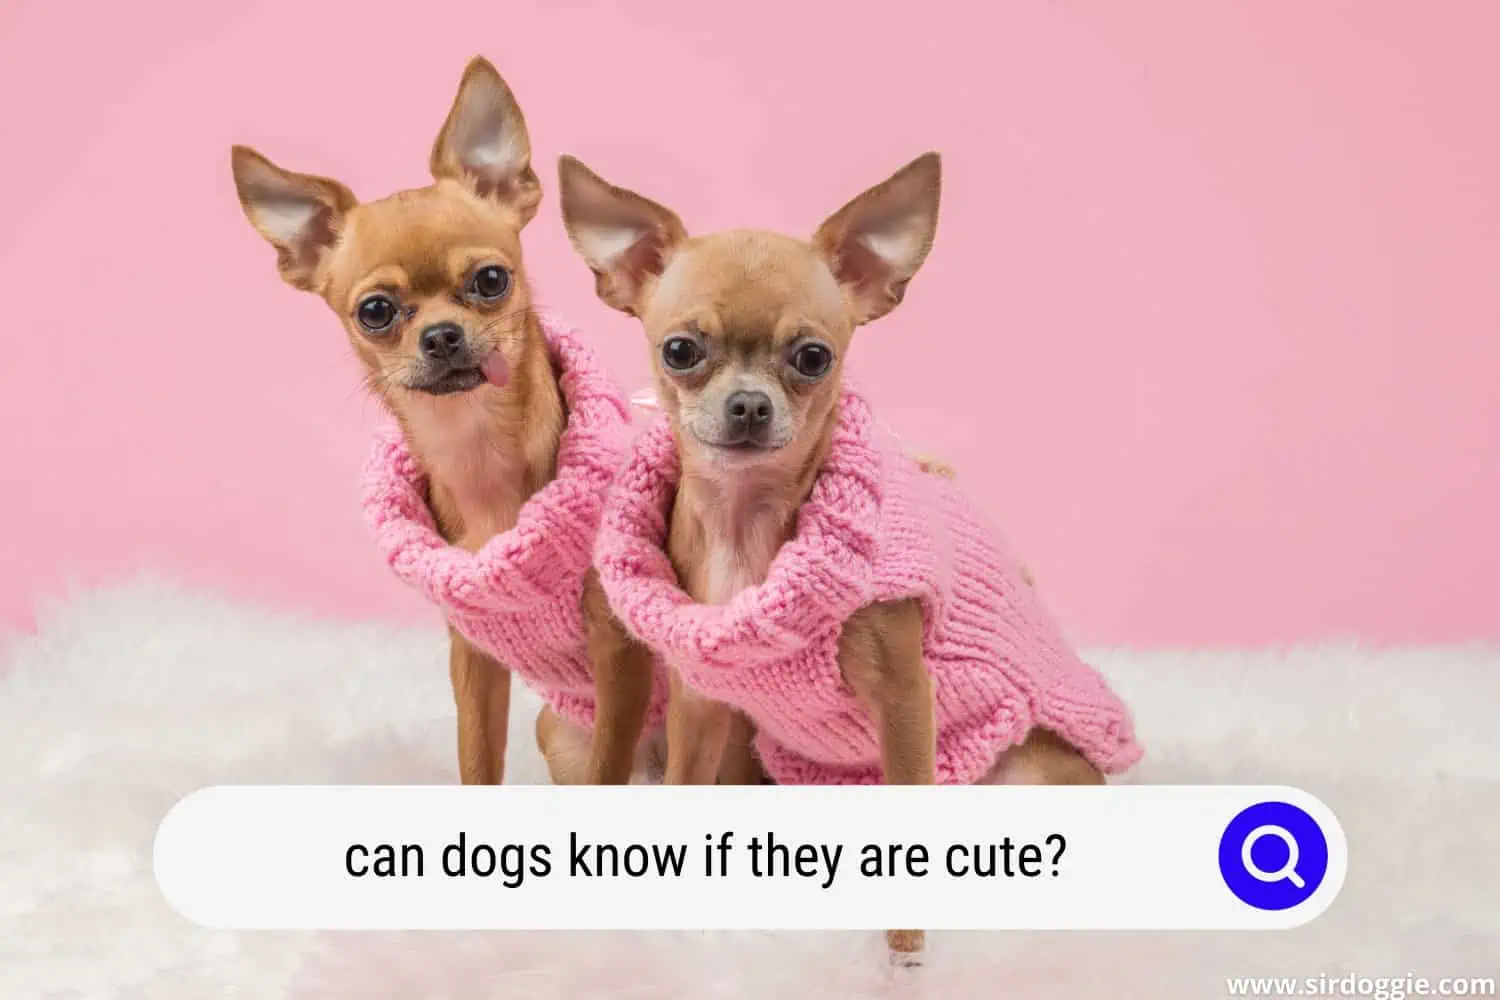 Dressed Cute Chihuahua Dogs in Pink Knitted Sweaters